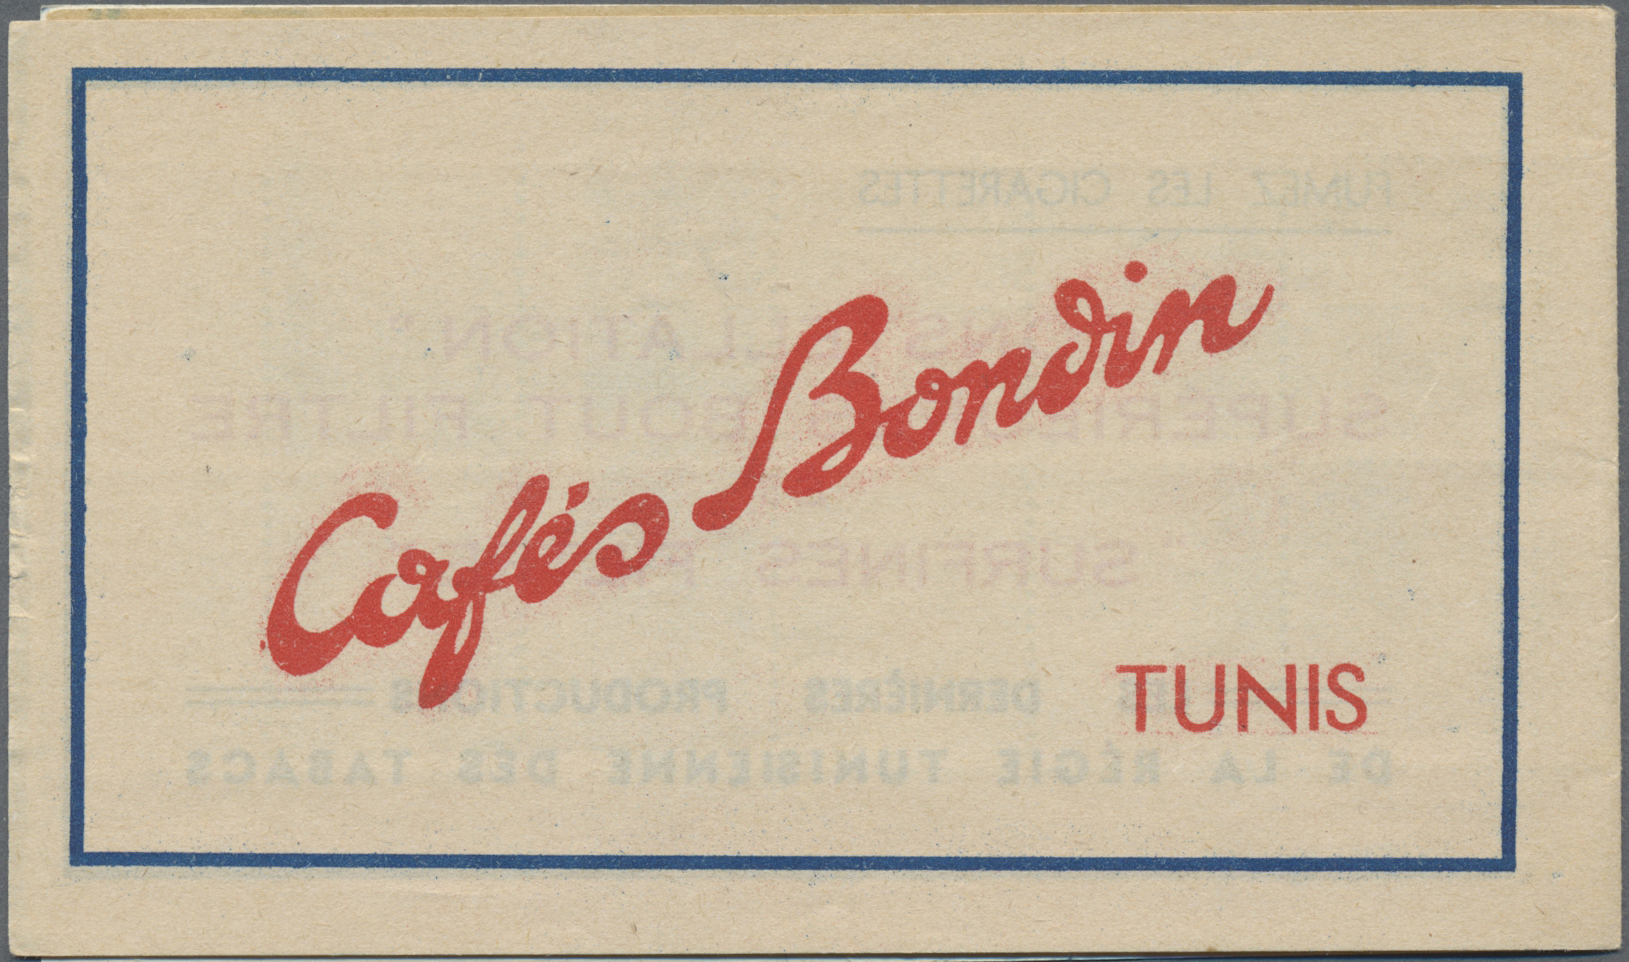 Lot 34846 - Thematik: Nahrung-Kaffee / food-coffee  -  Auktionshaus Christoph Gärtner GmbH & Co. KG Sale #44 Collections Germany